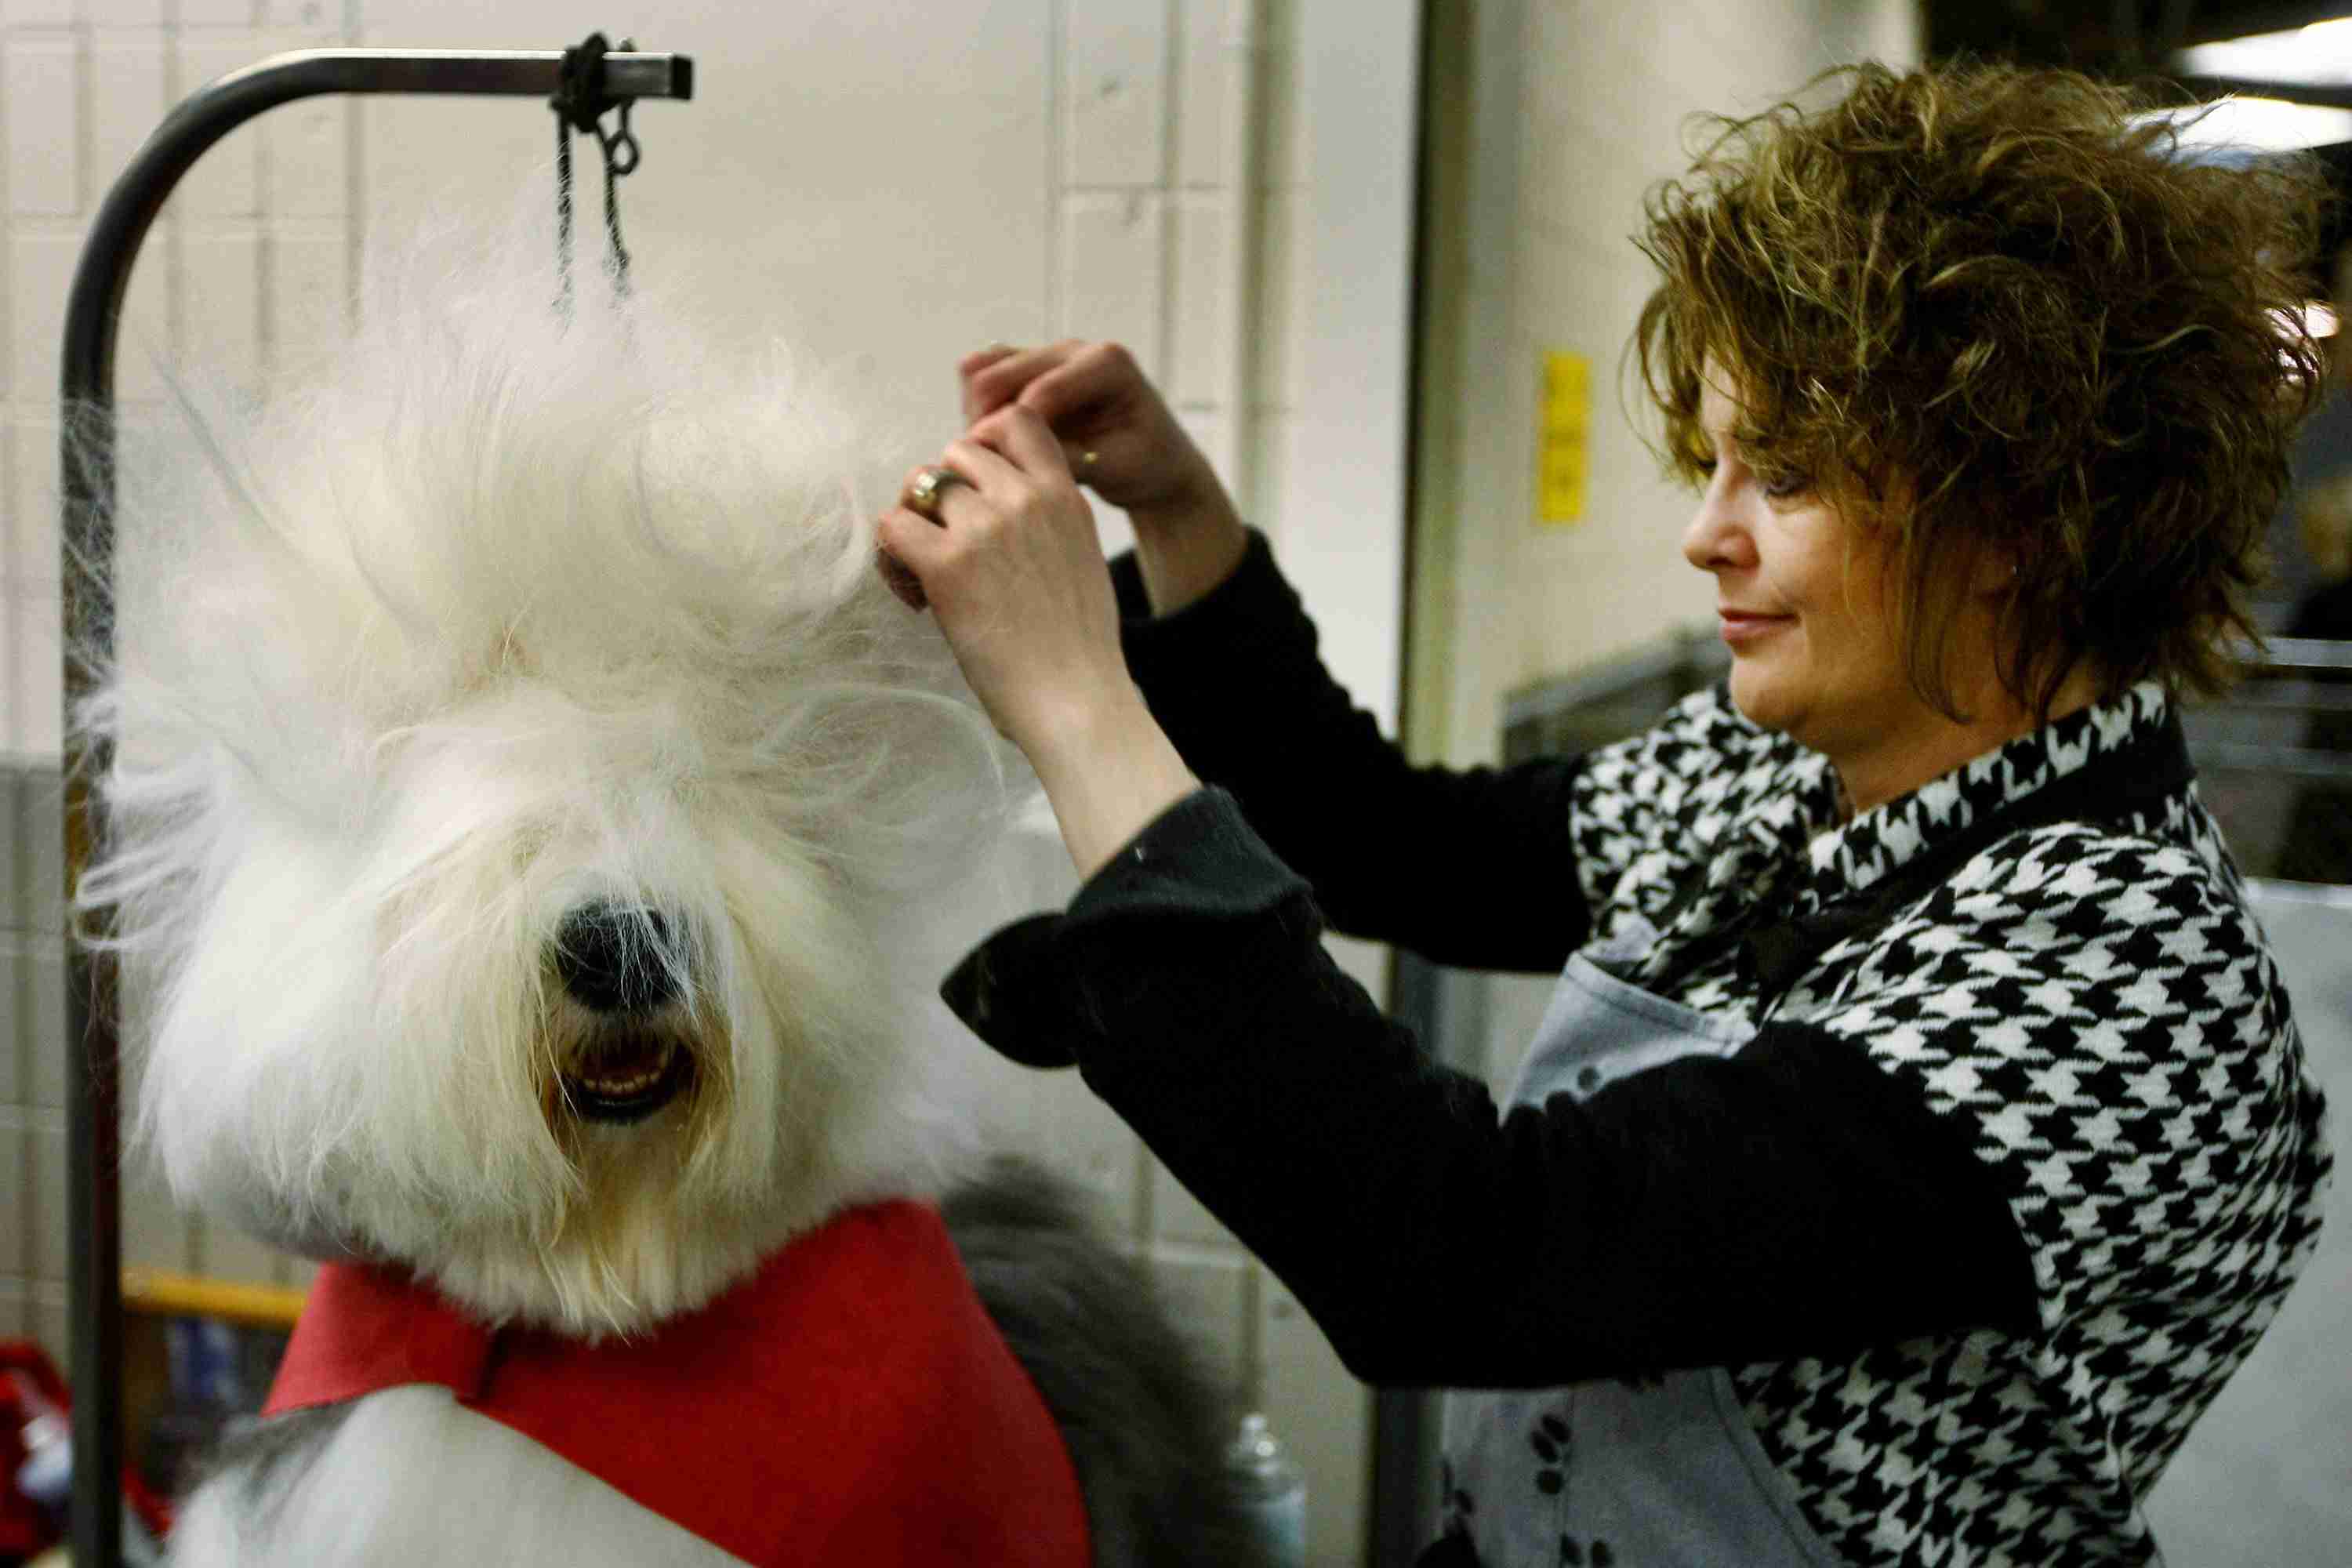 A woman grooming a dog